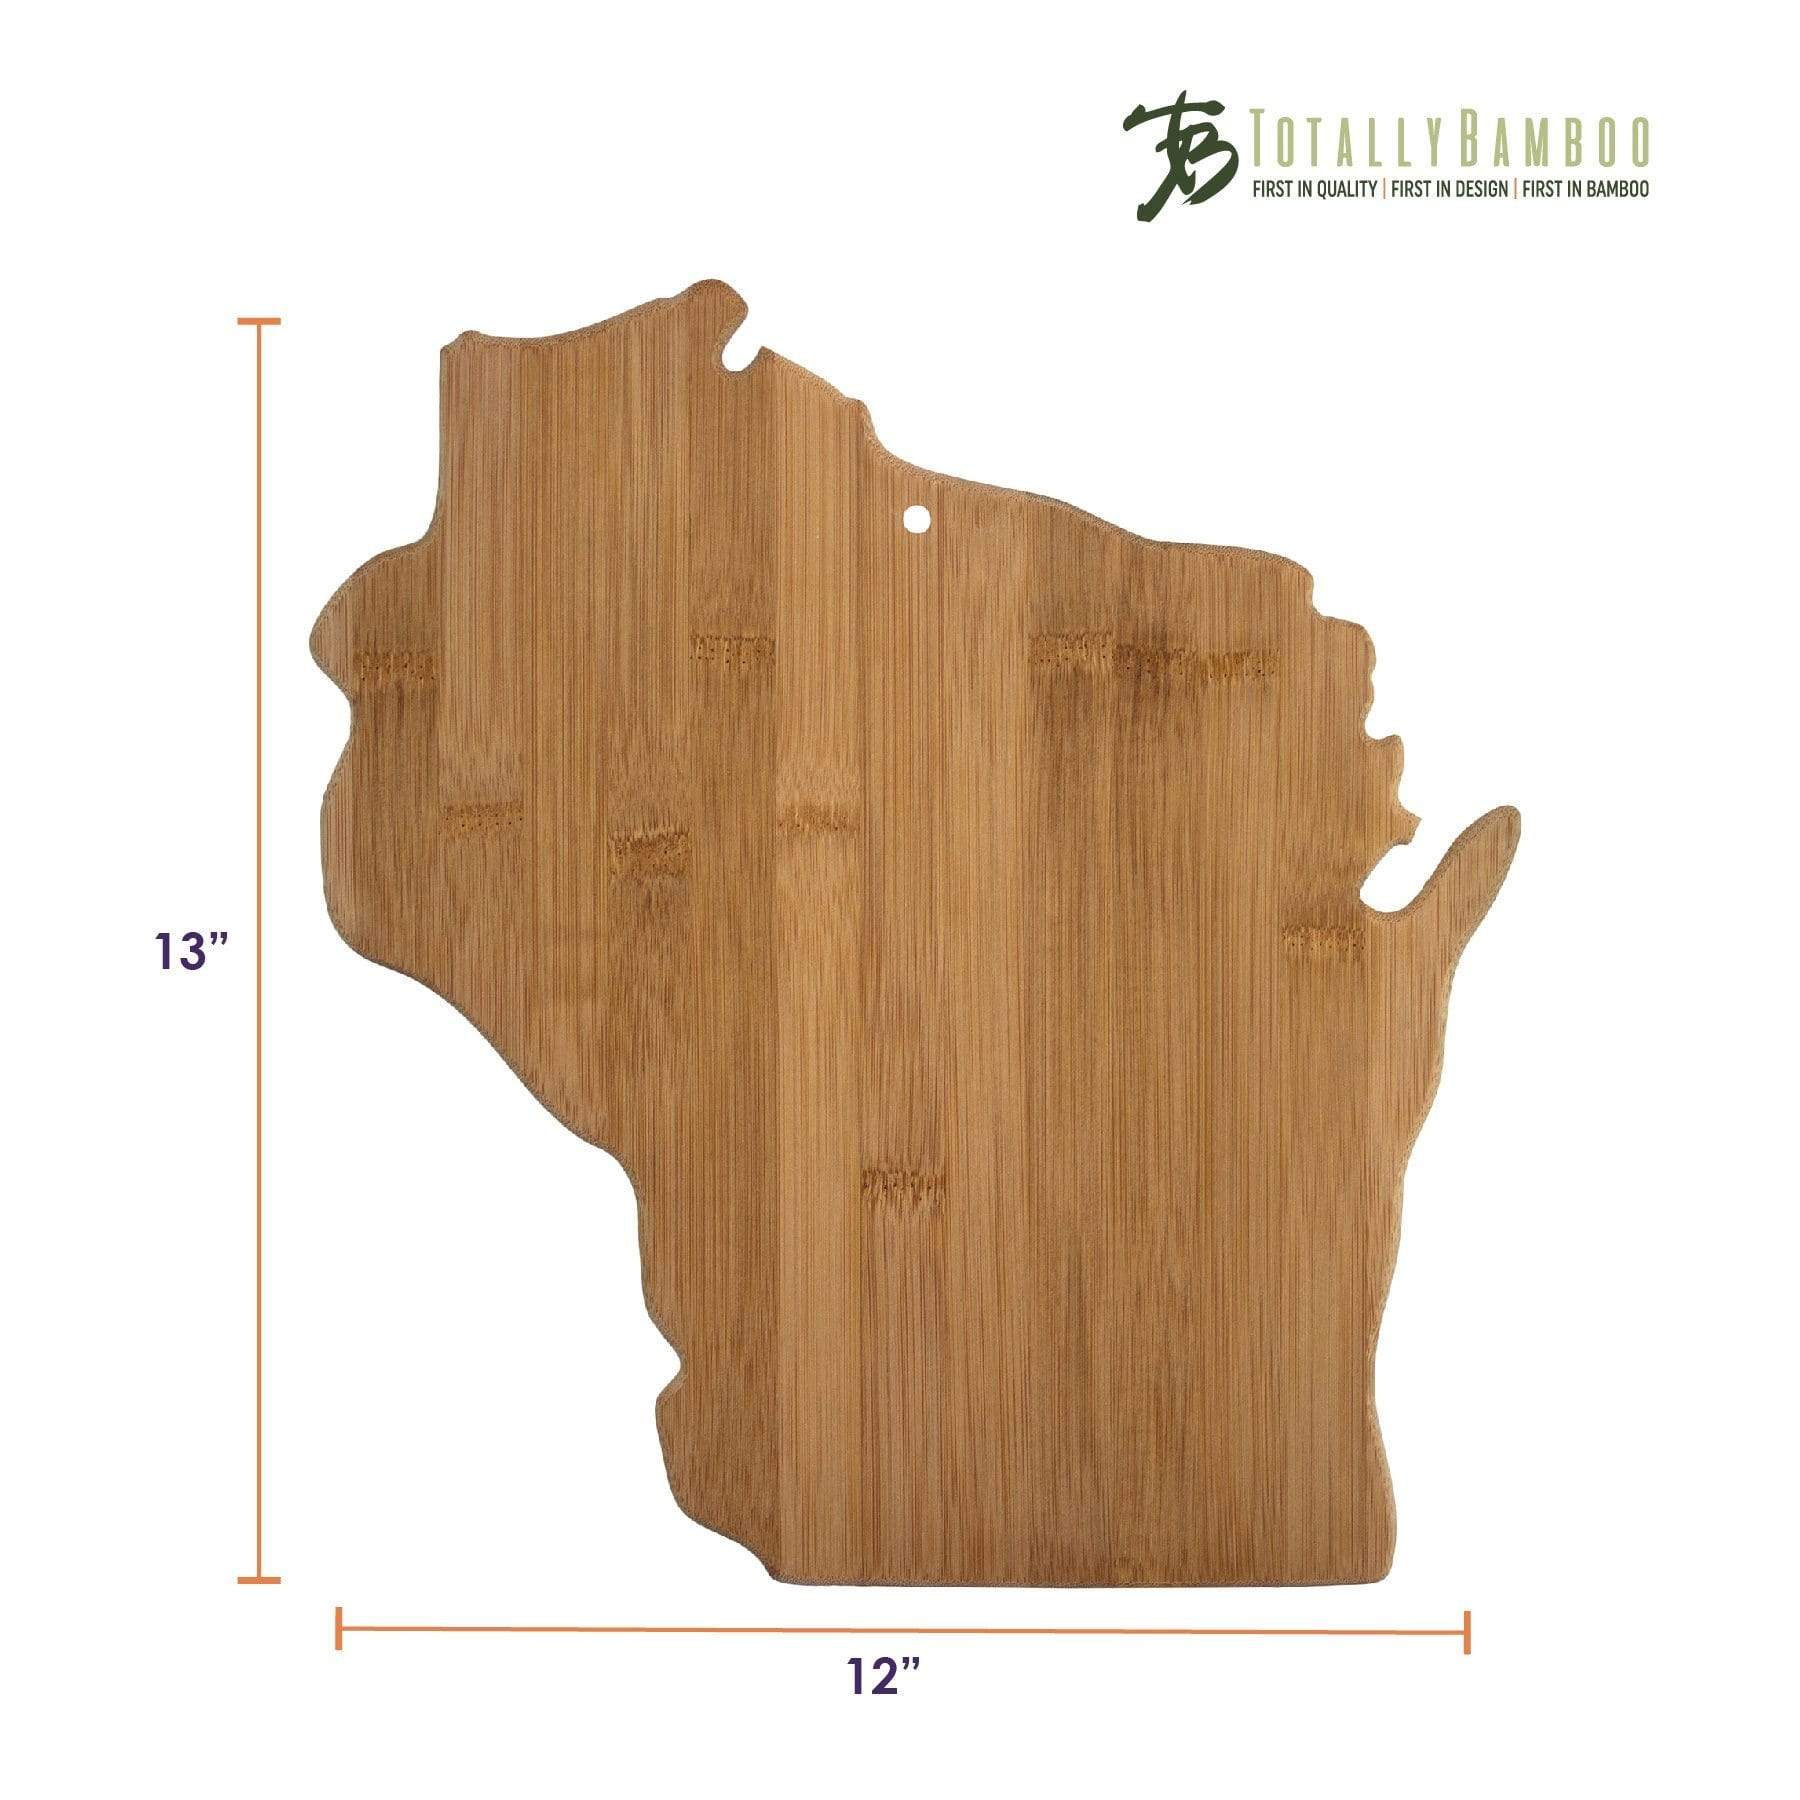 Totally Bamboo WI Cutting Board with measurements